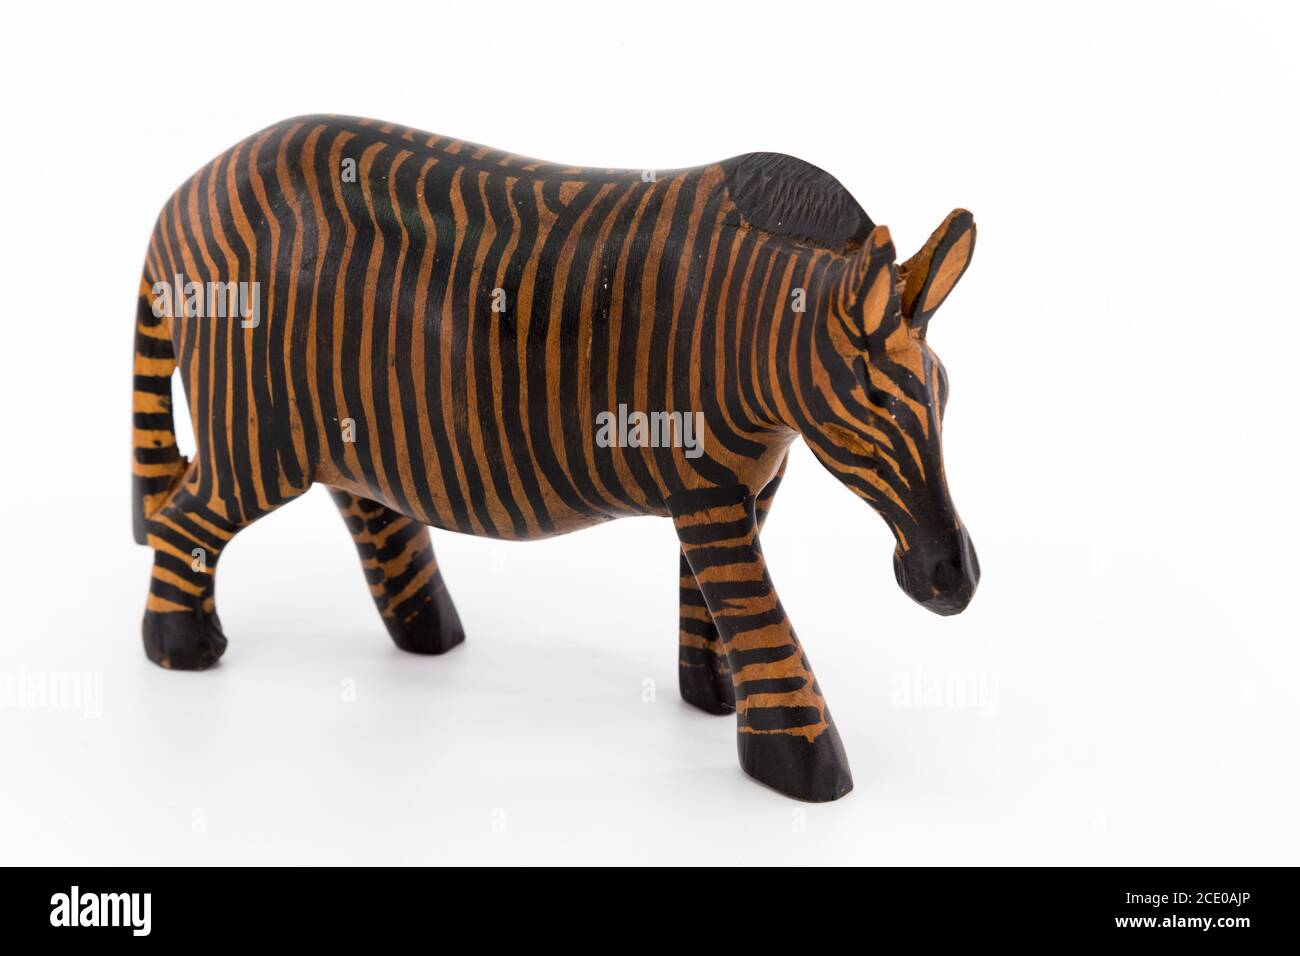 Wooden figure of a zebra on white background Stock Photo